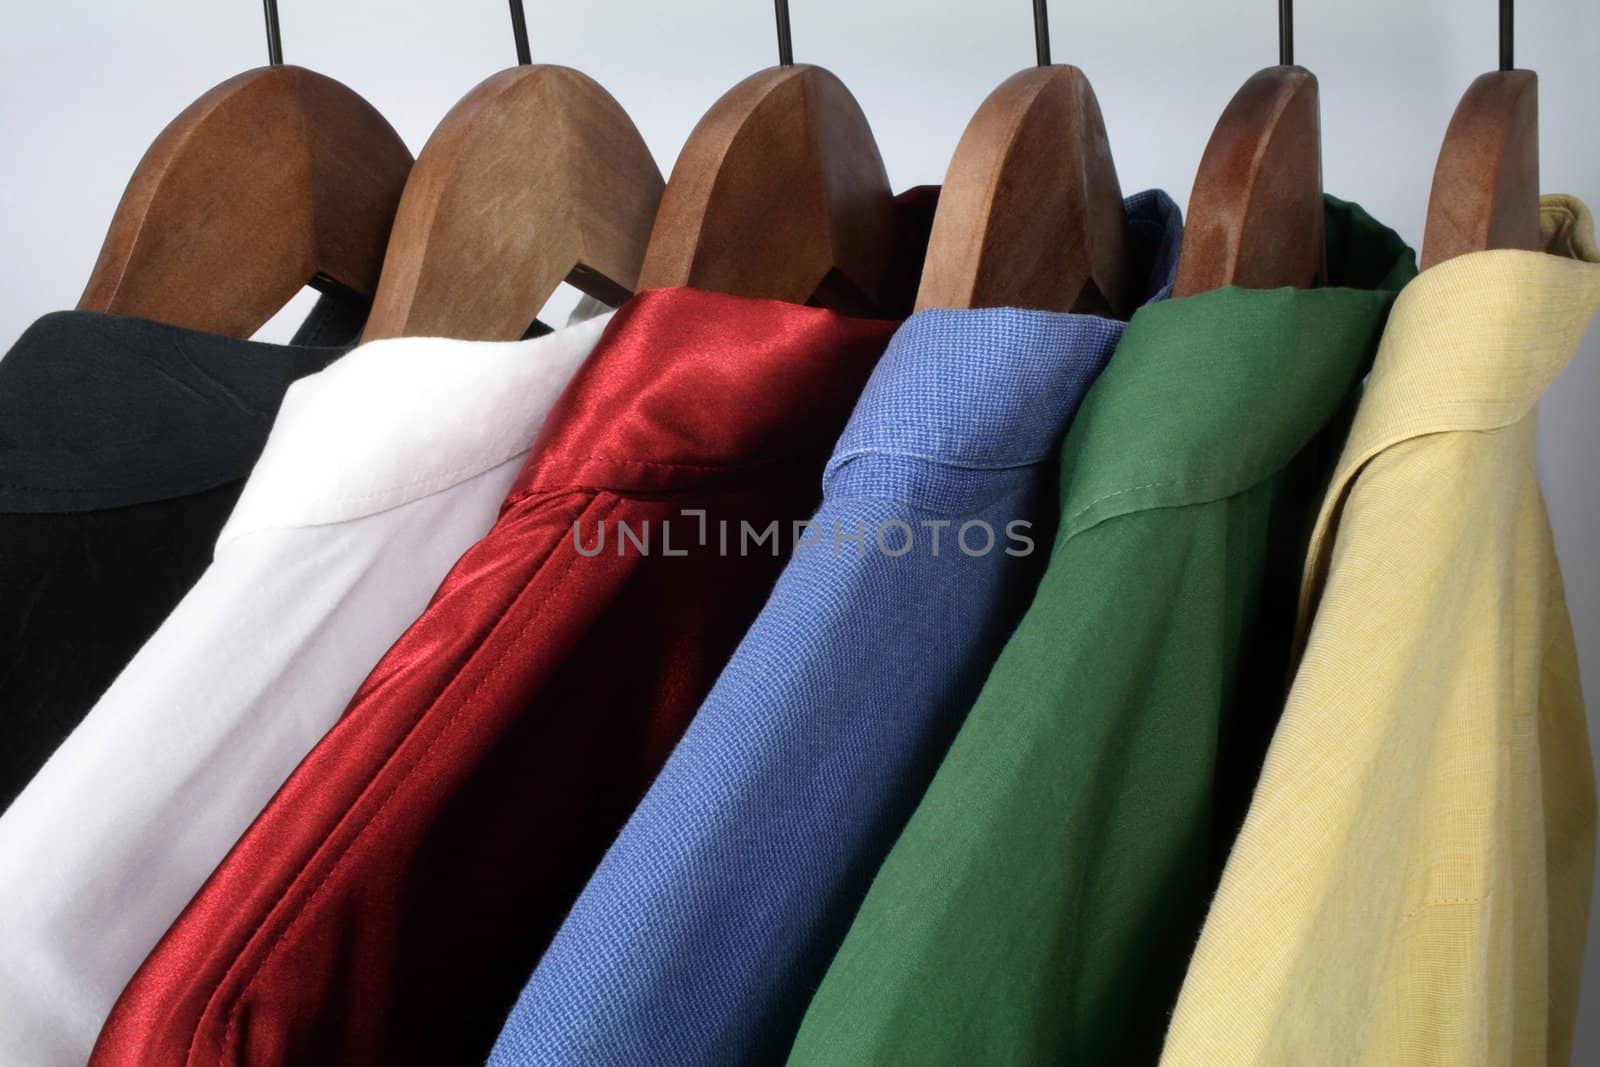 Man's clothing: choice of stylish colorful shirts on wooden hangers.